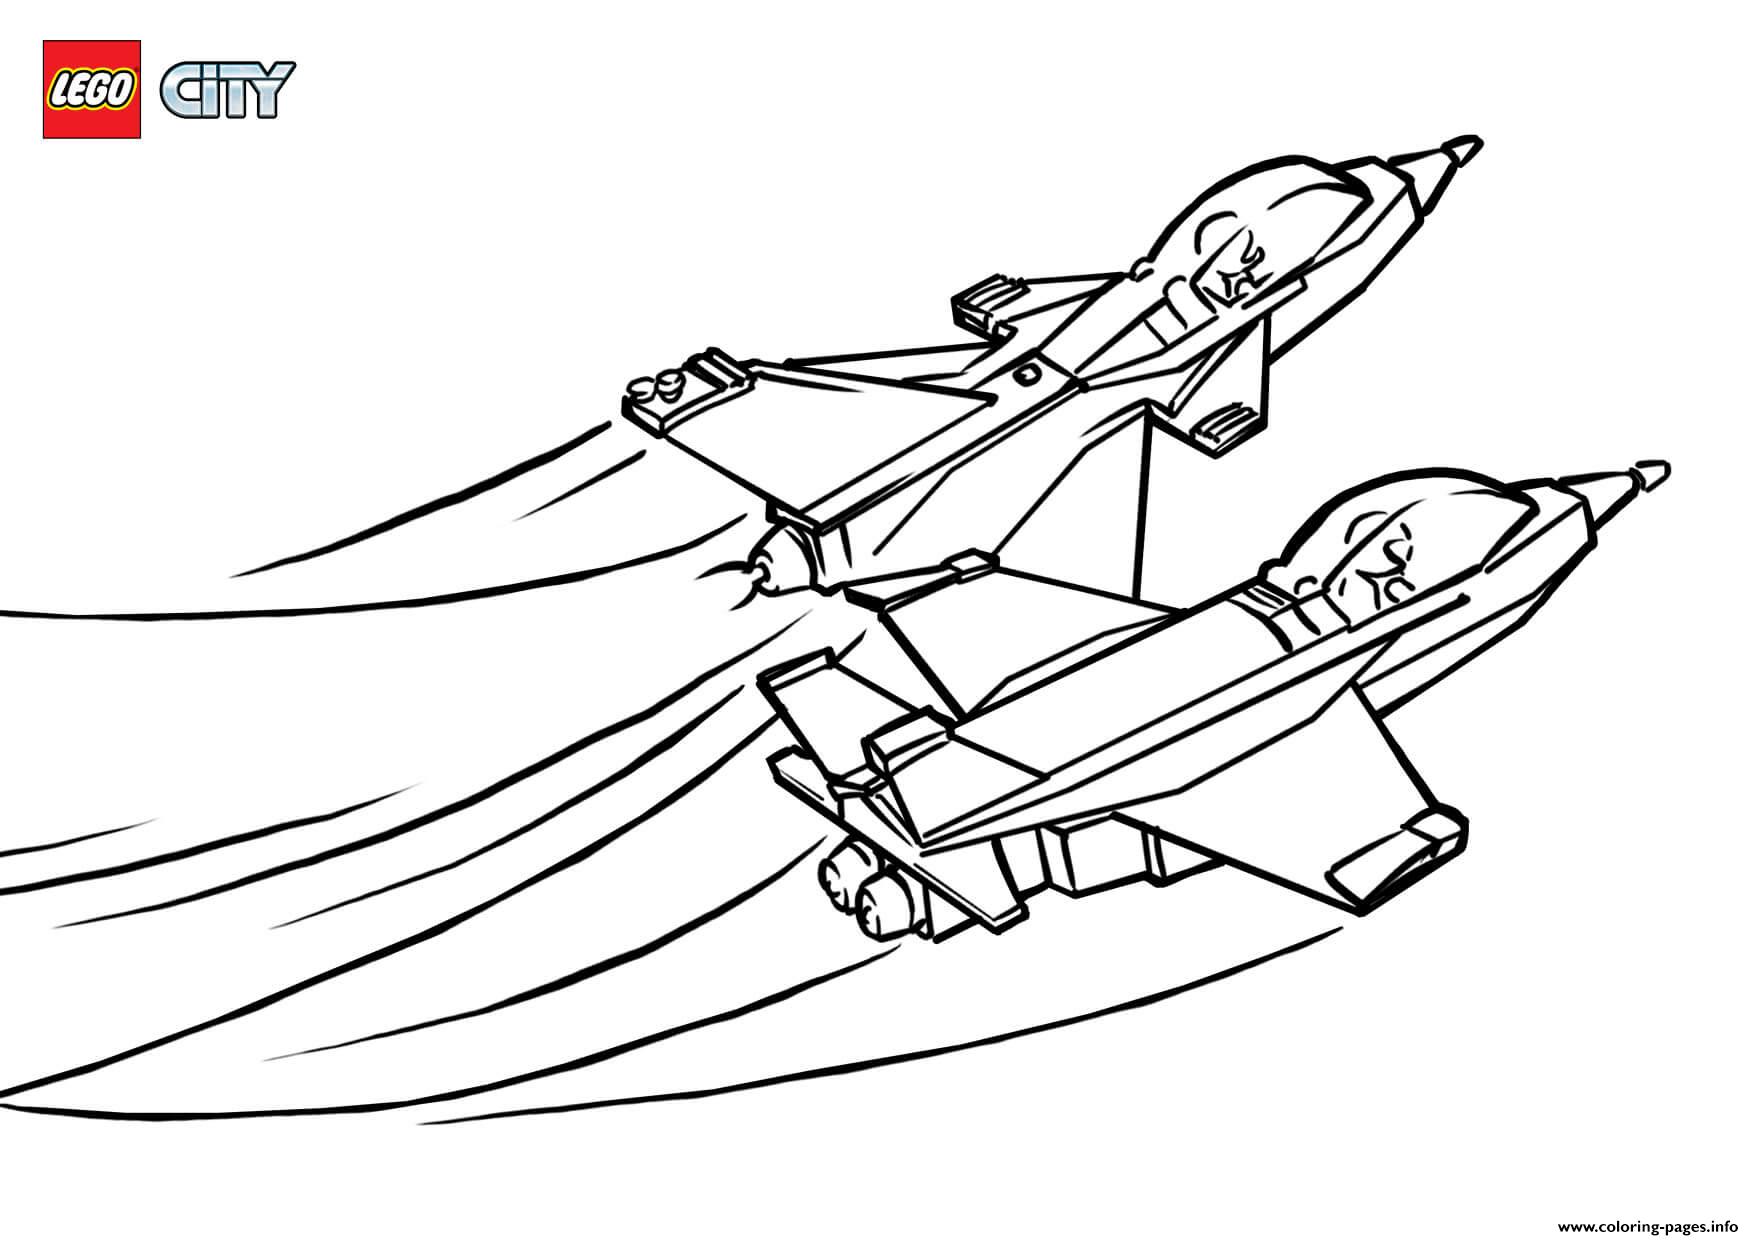 Lego Airplane Coloring Sheet / Lego Airplane Coloring Pages At